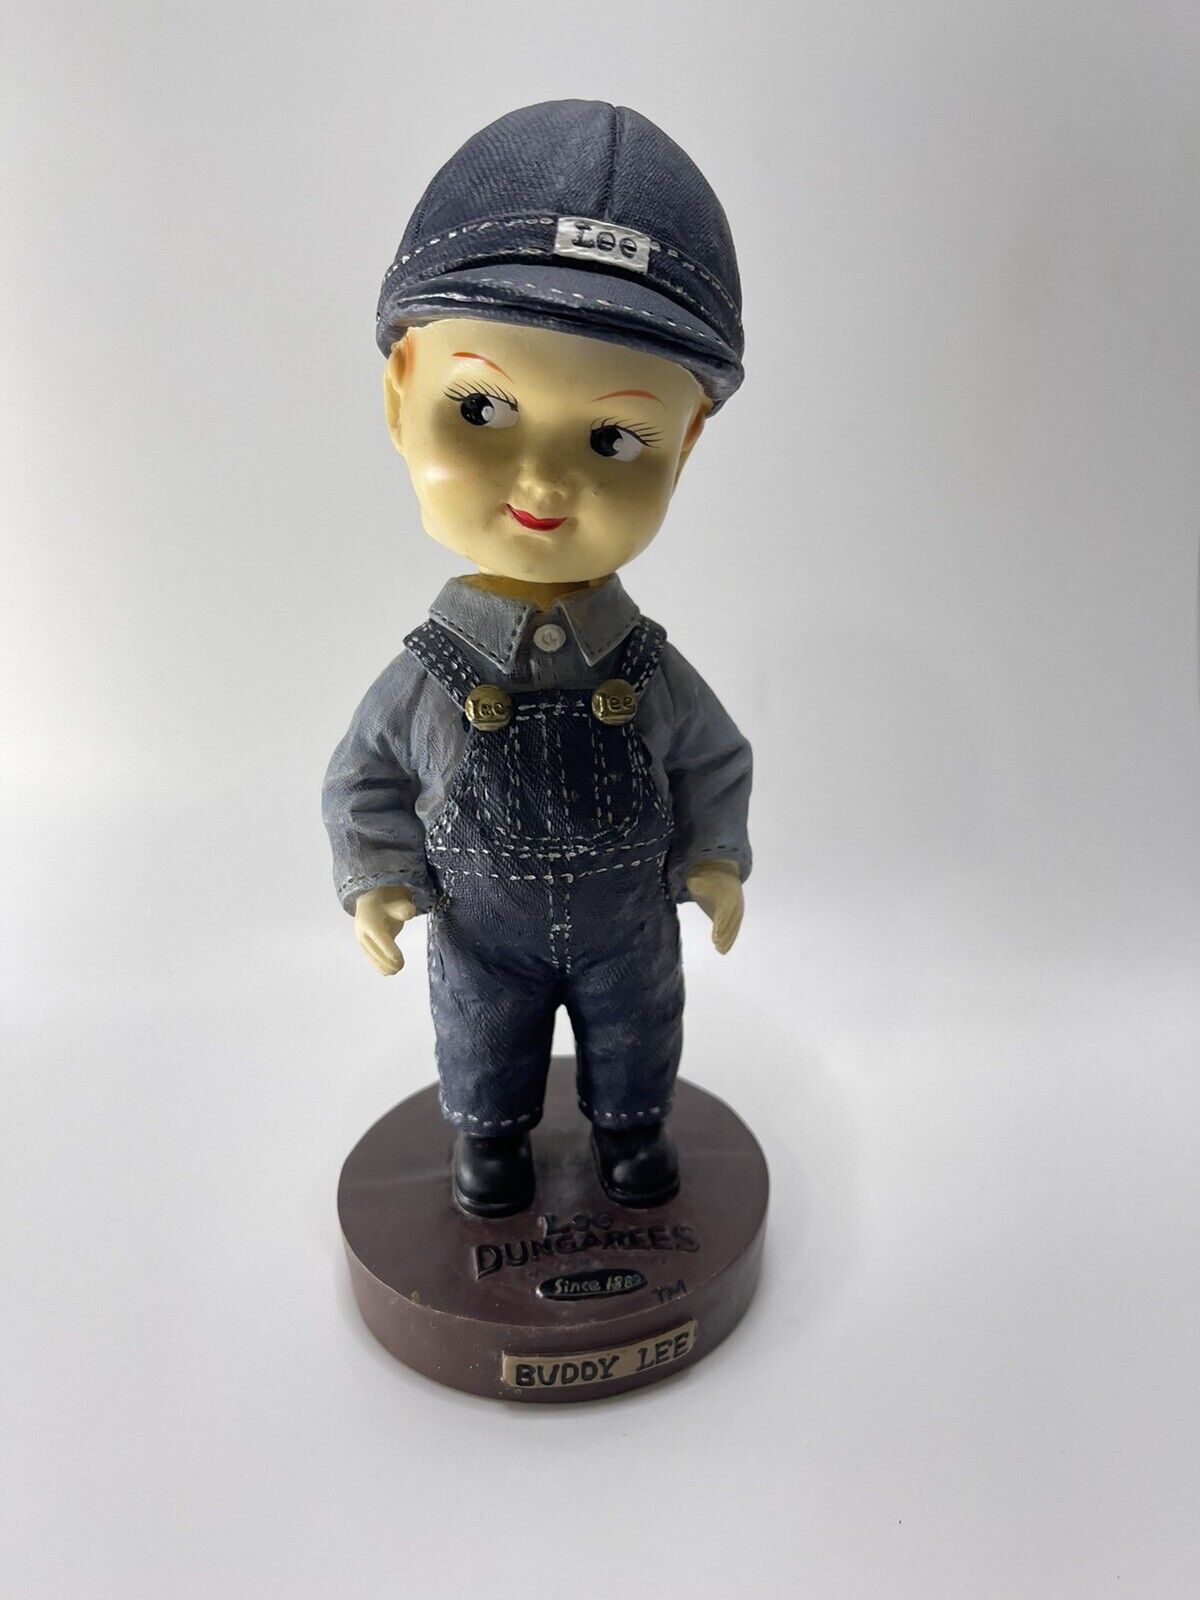 BUDDY LEE Dungarees Overalls Bobble Head DOLL 